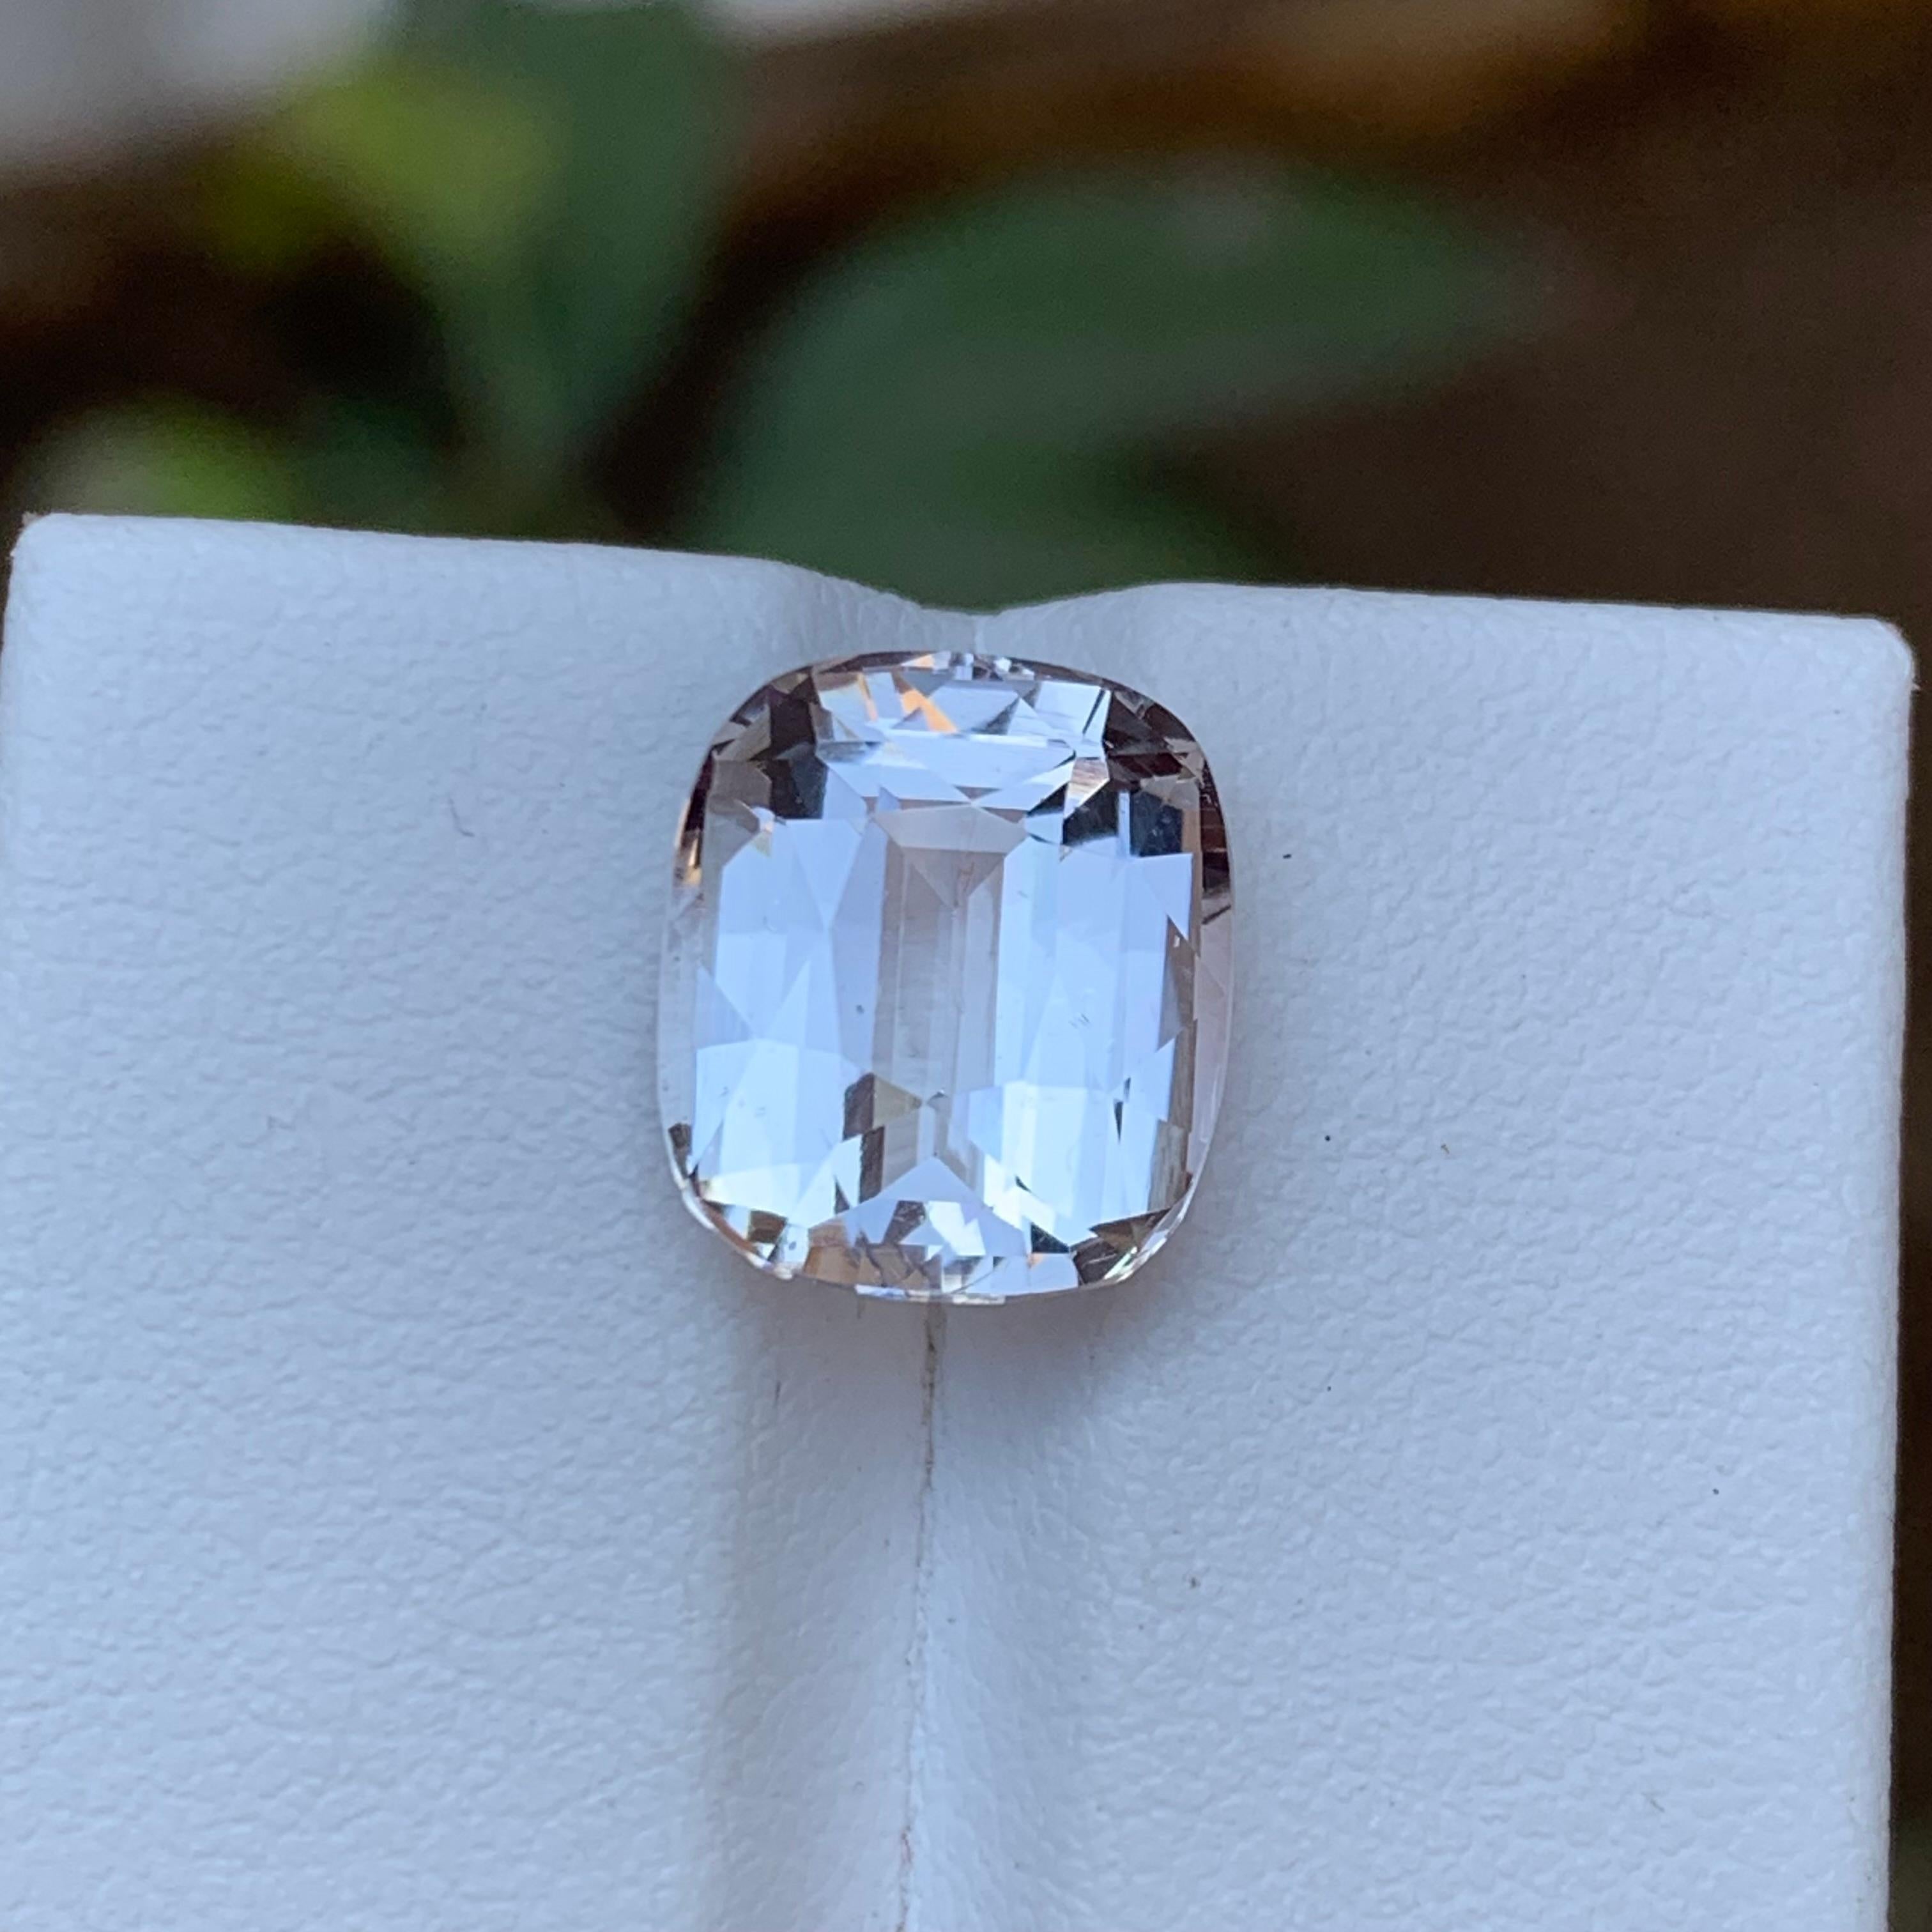 Rare White Natural Morganite Gemstone, 6.10 Ct Cushion Cut for Ring/Pendant Afg For Sale 8